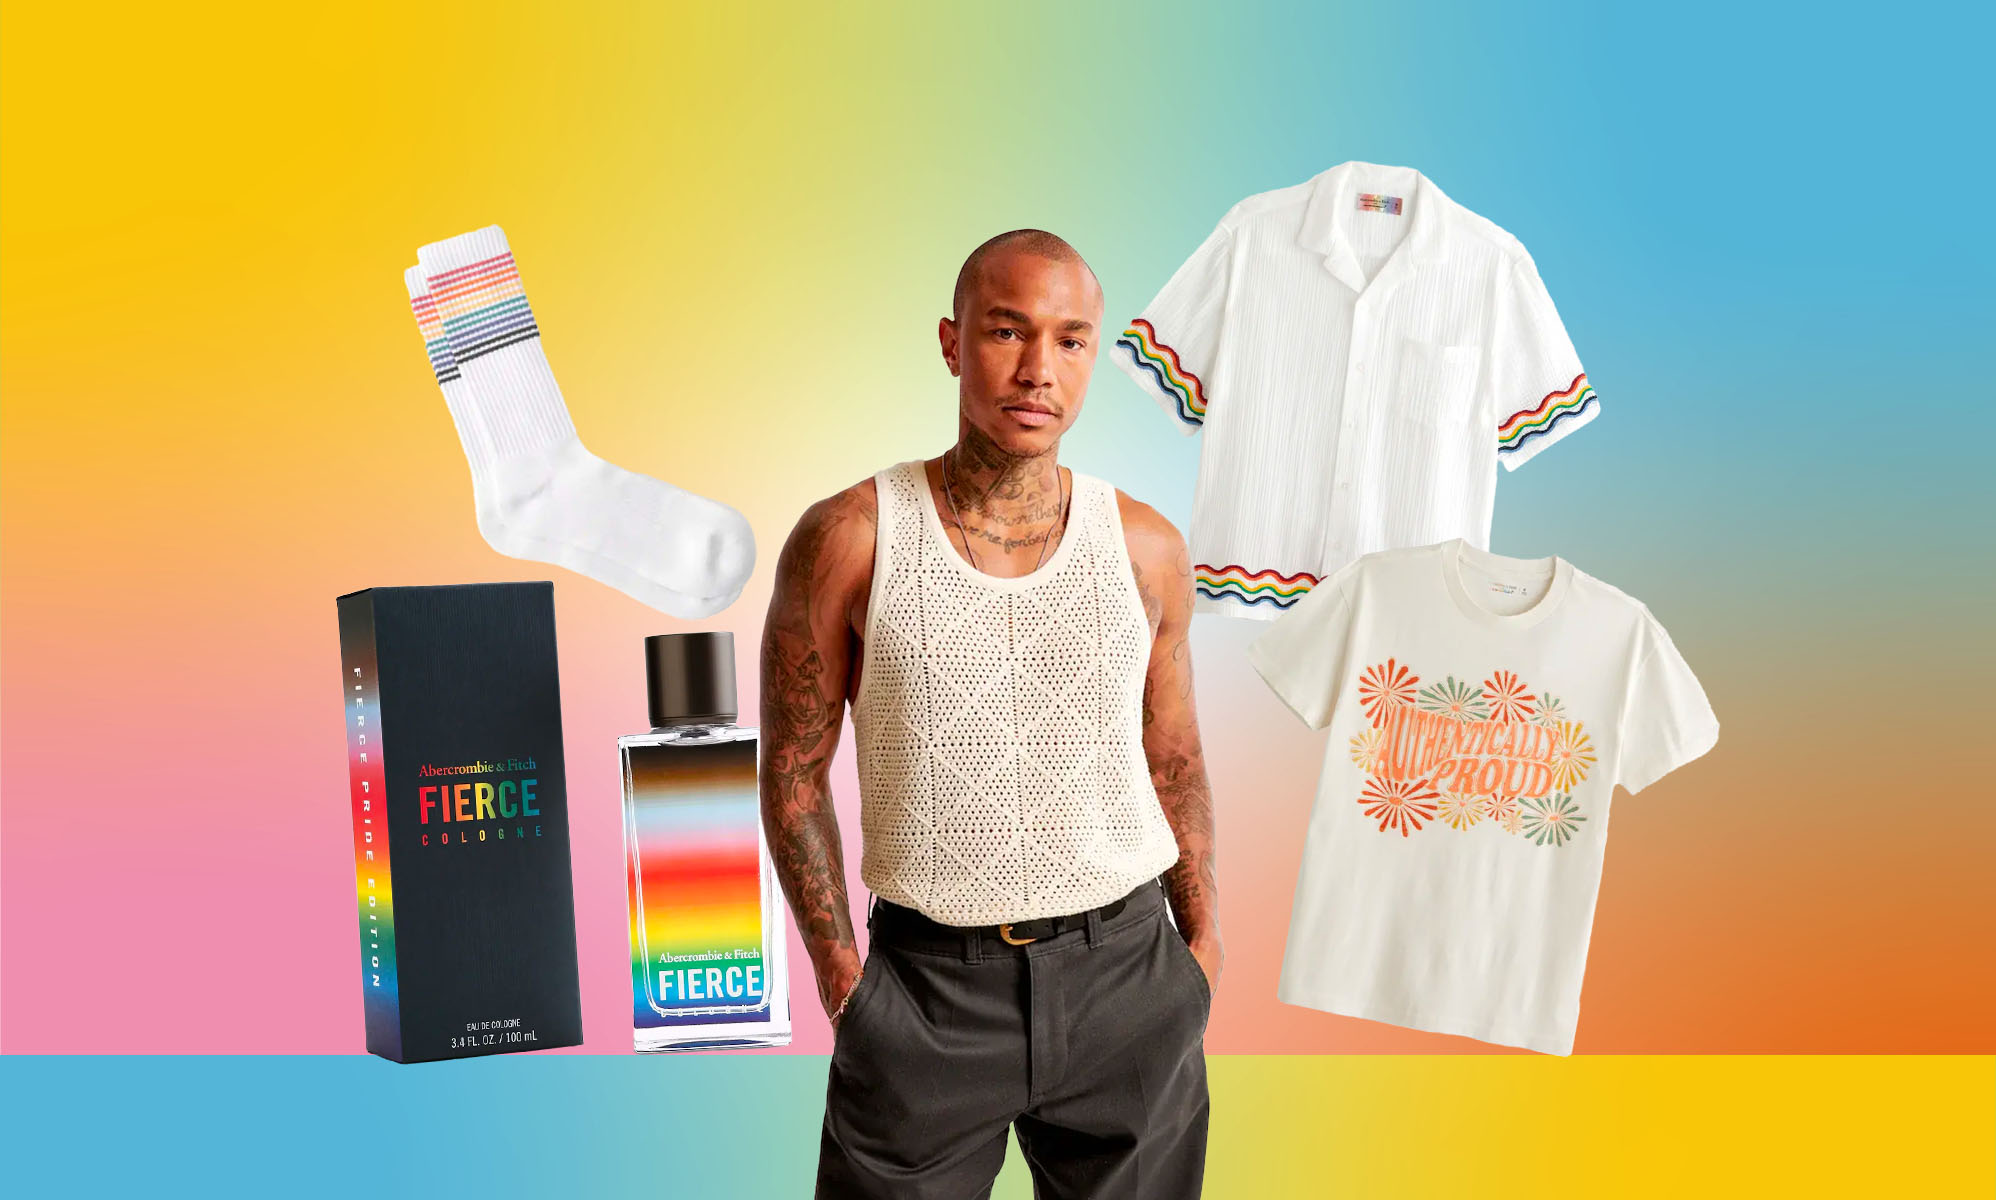 mark on X: Target Pride collection just dropped